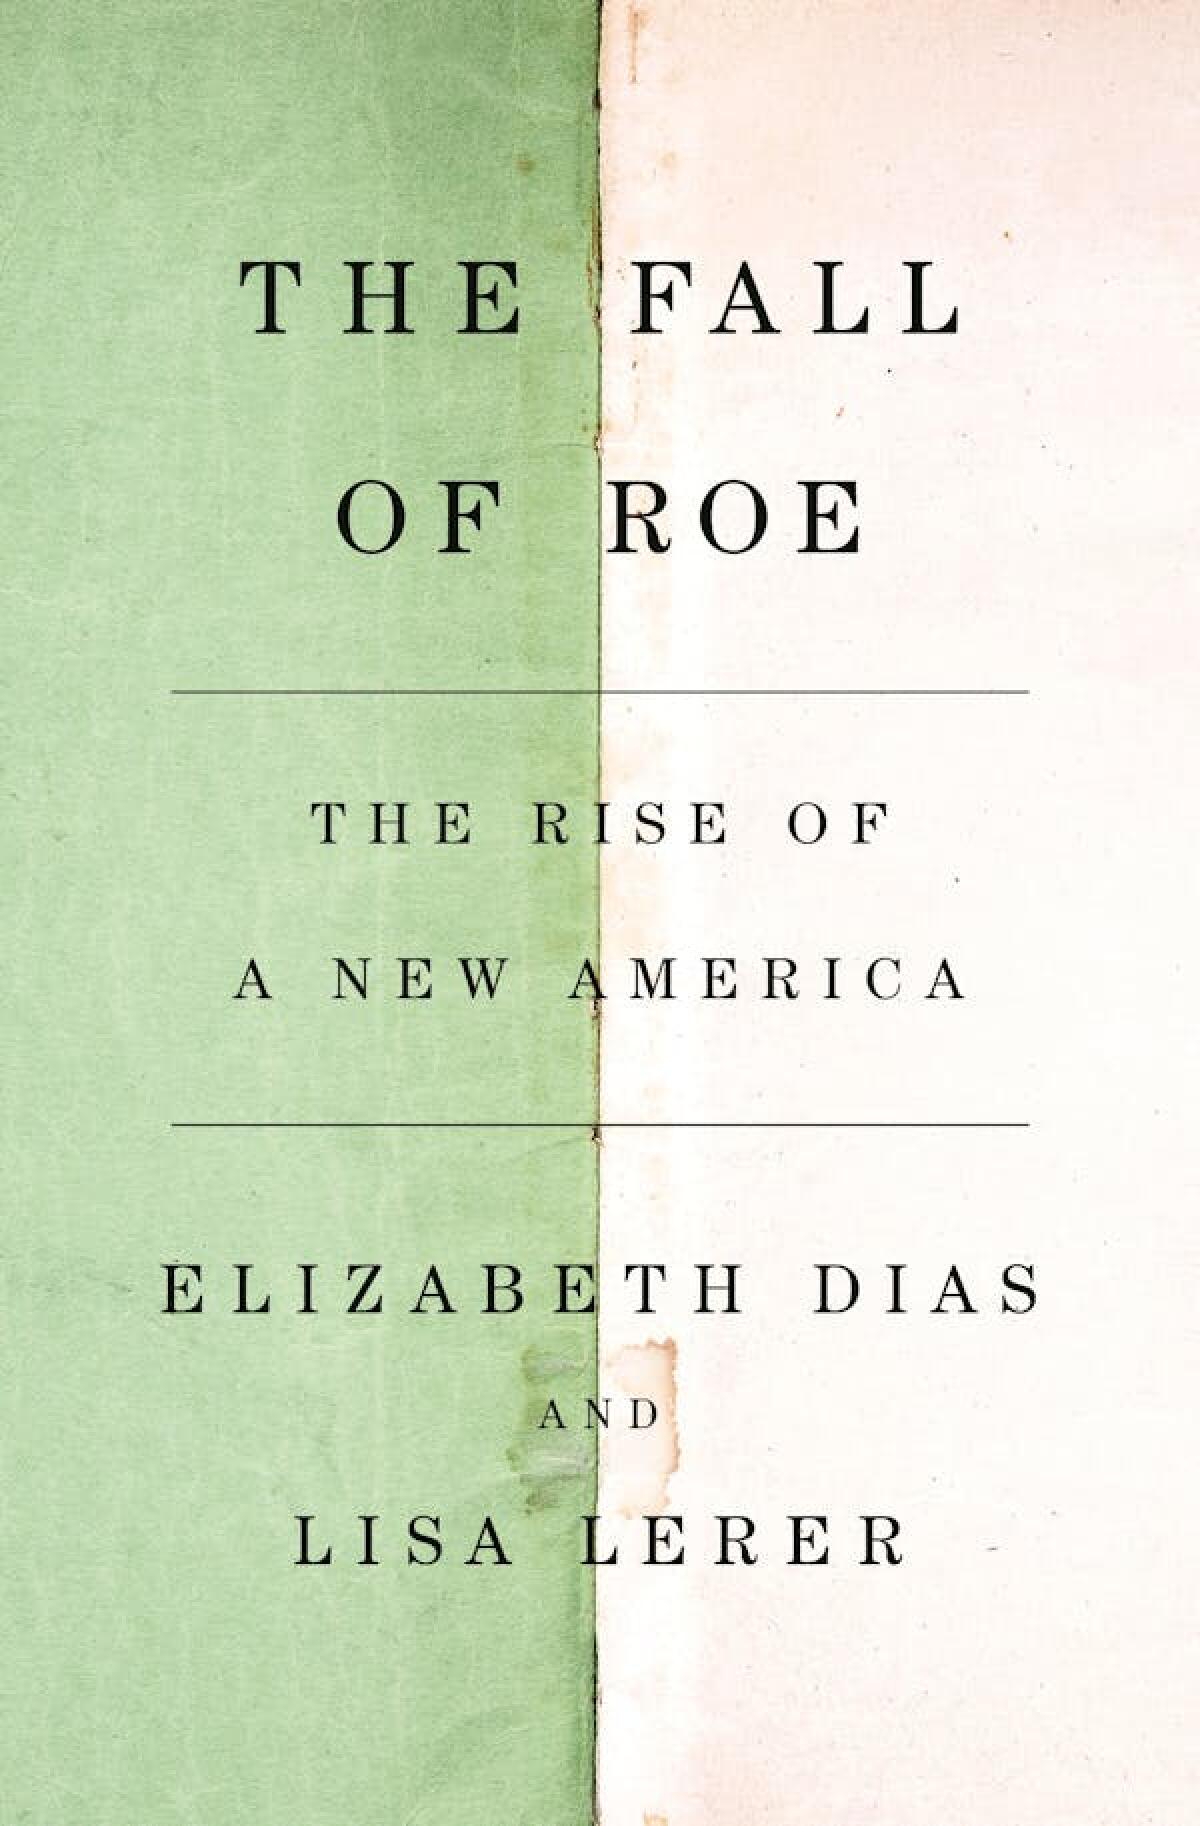 Cover from "The fall of Roe"